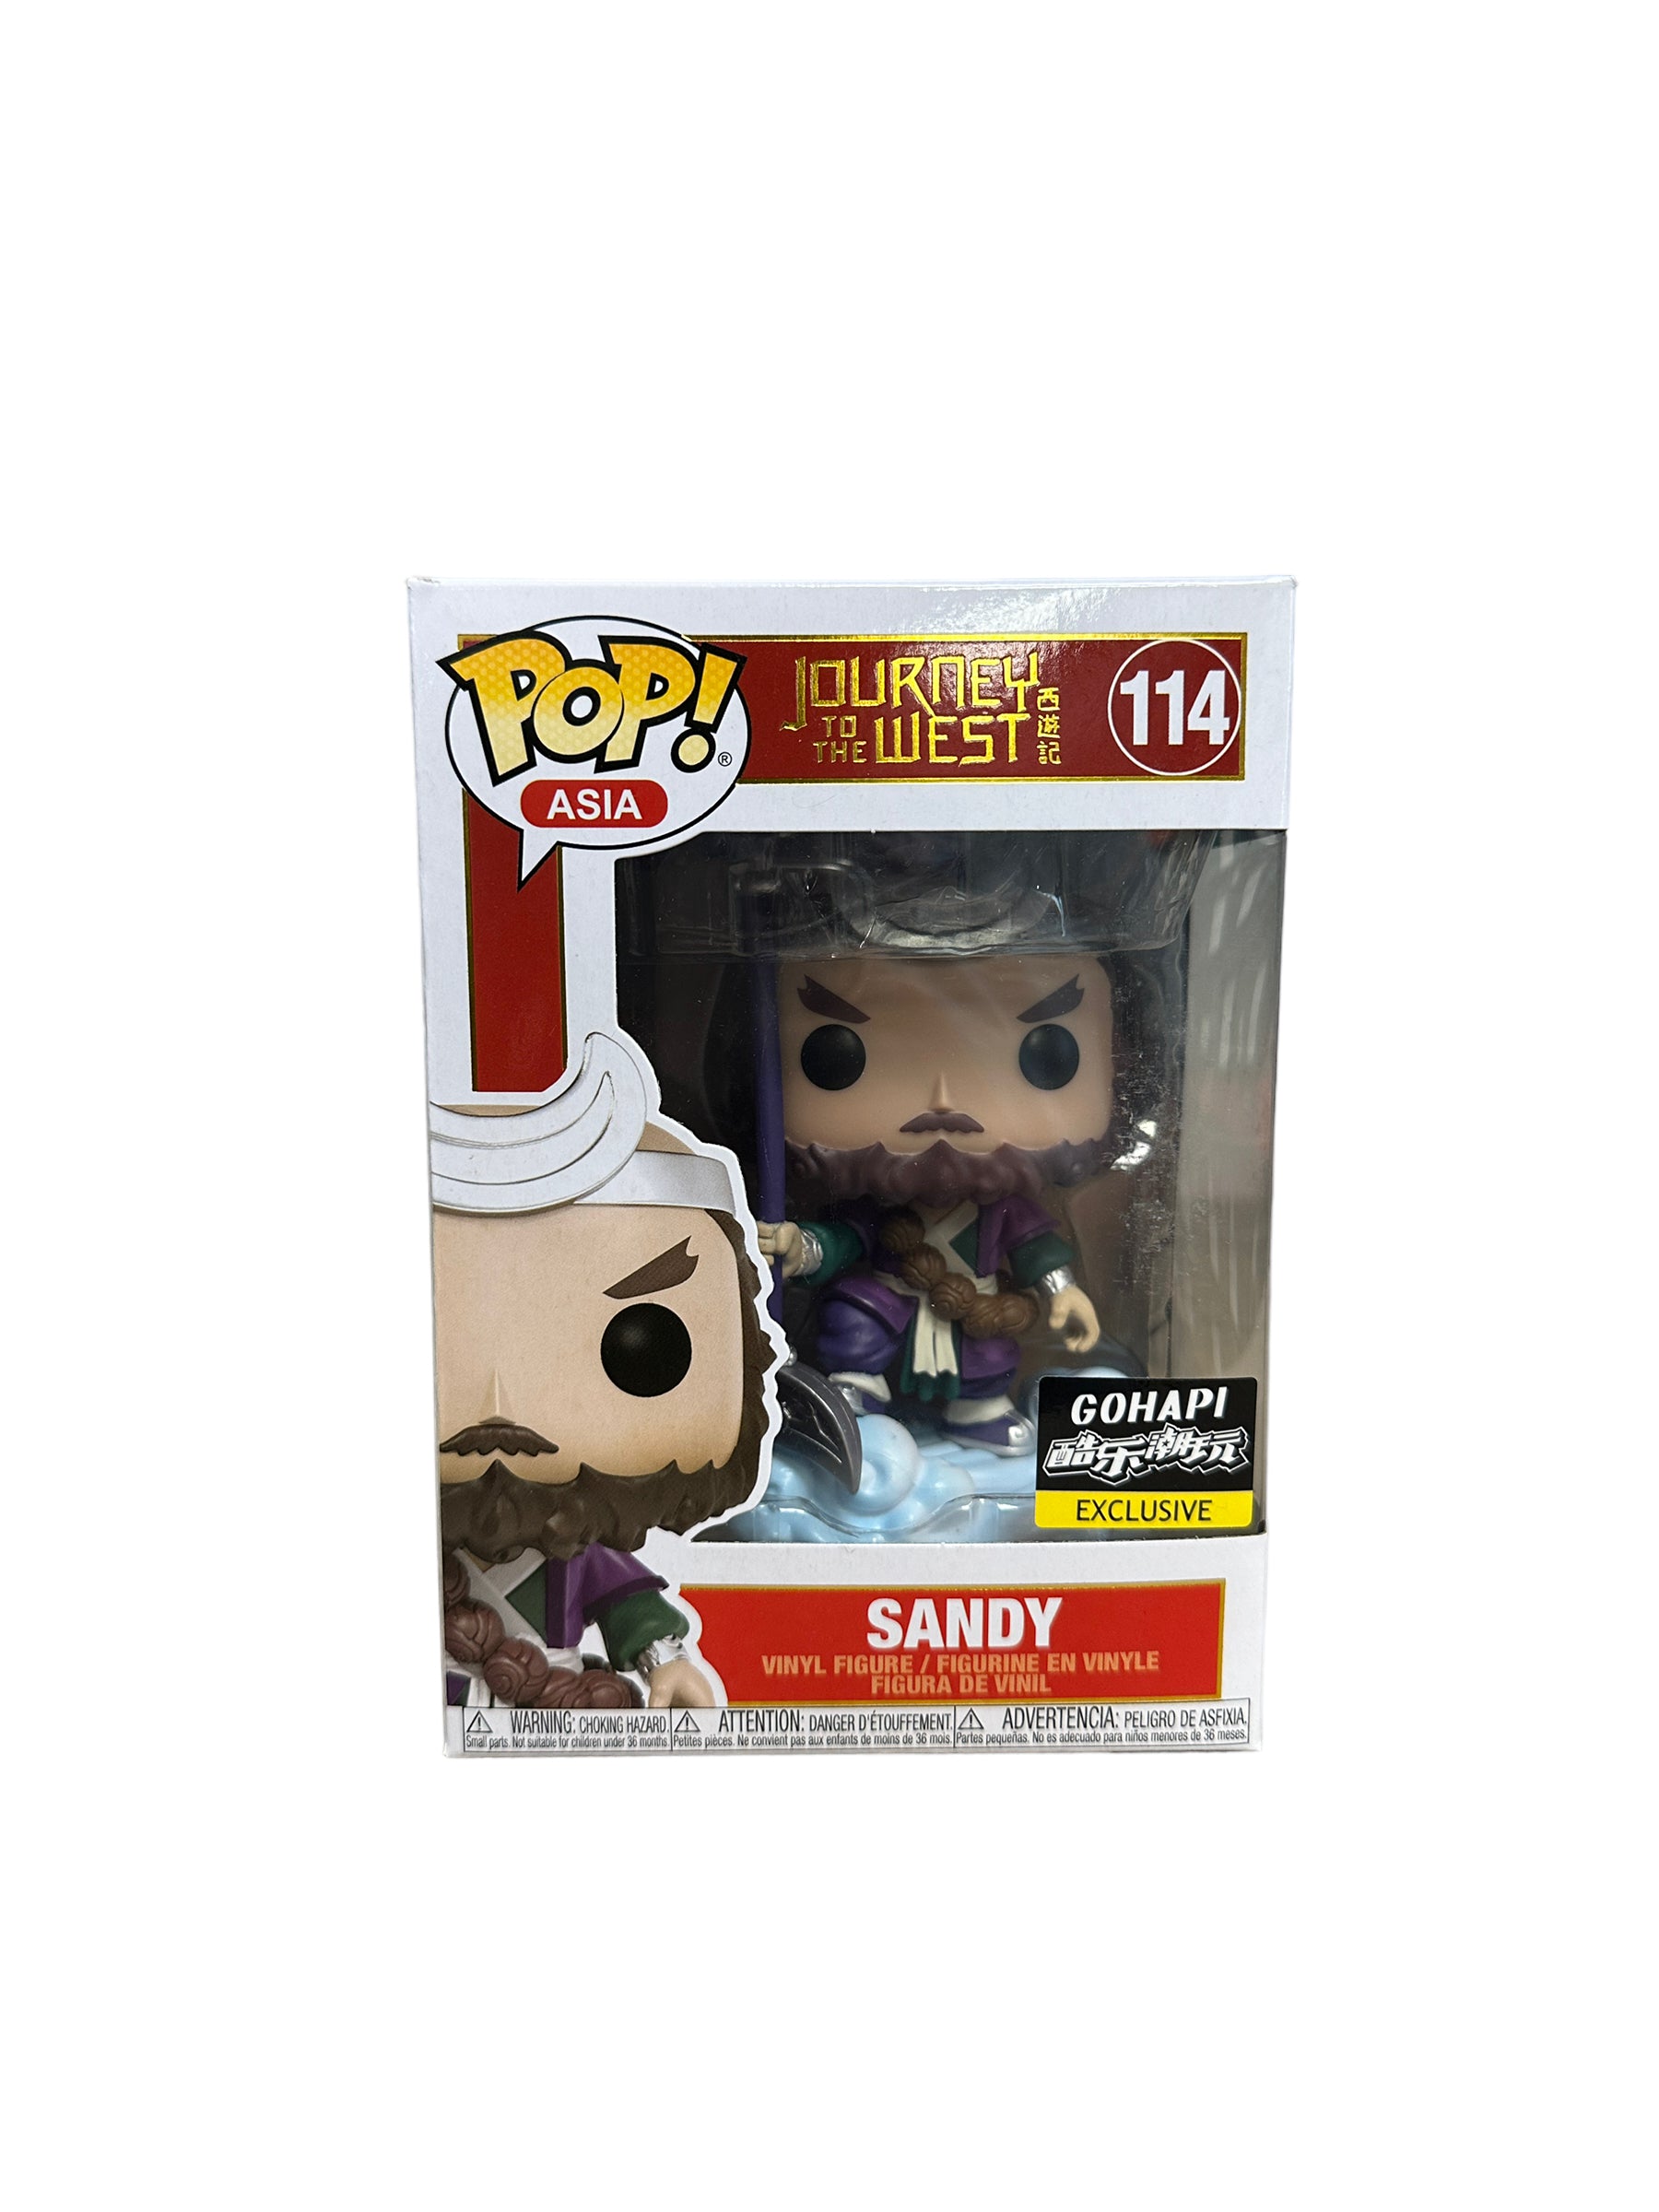 Sandy #114 Funko Pop! - Journey to the West - Gohapi Exclusive - Condition 8.5/10